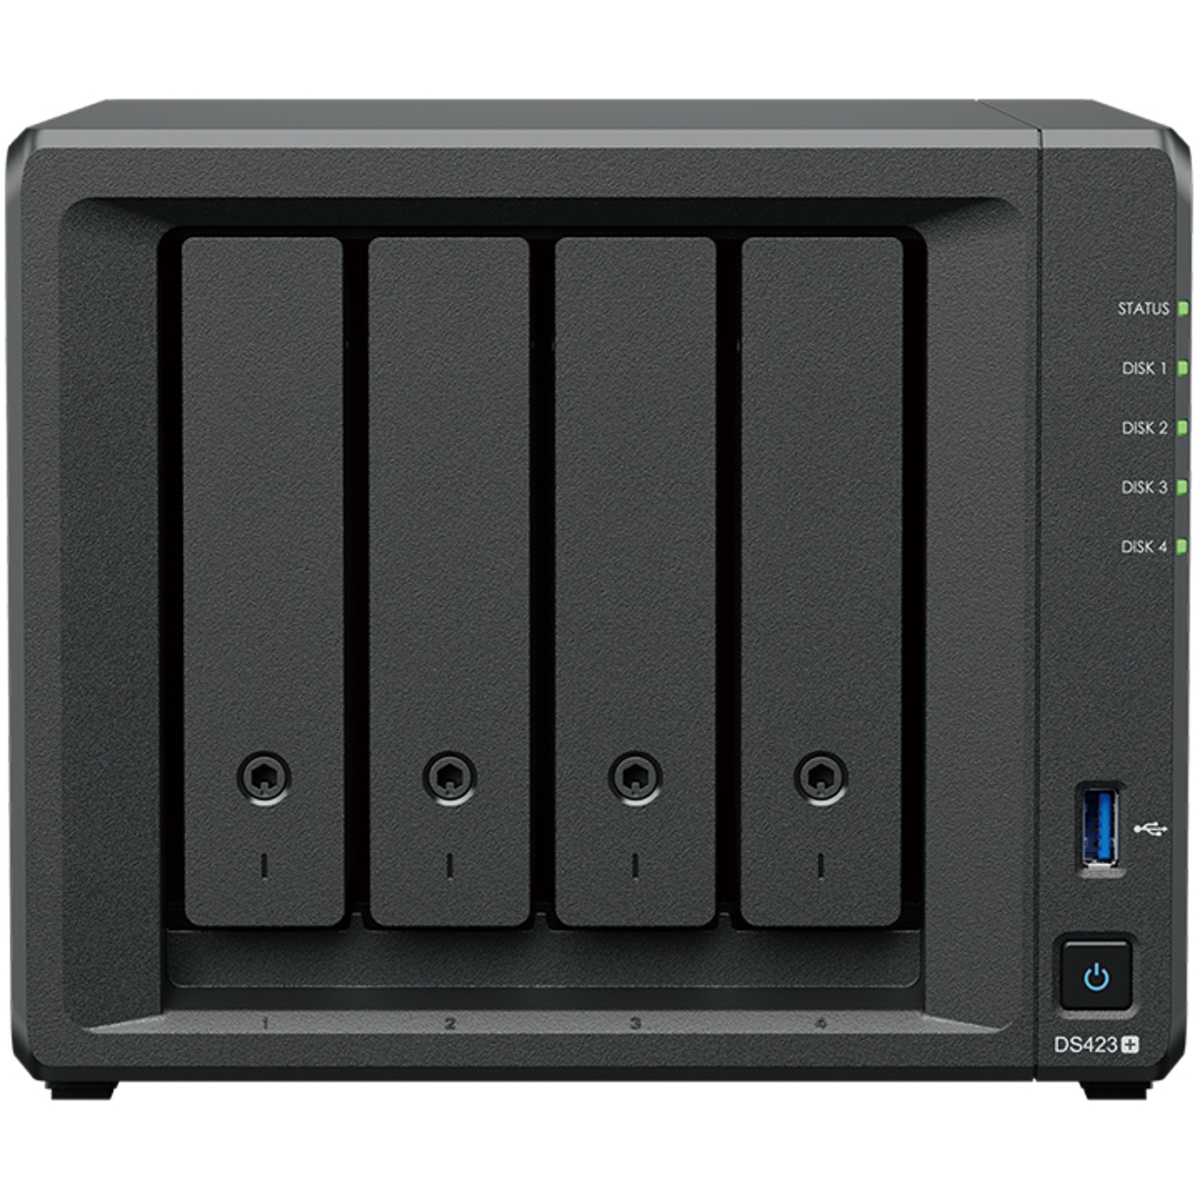 Synology DiskStation DS423+ 64tb 4-Bay Desktop Multimedia / Power User / Business NAS - Network Attached Storage Device 4x16tb Seagate EXOS X18 ST16000NM000J 3.5 7200rpm SATA 6Gb/s HDD ENTERPRISE Class Drives Installed - Burn-In Tested - FREE RAM UPGRADE DiskStation DS423+